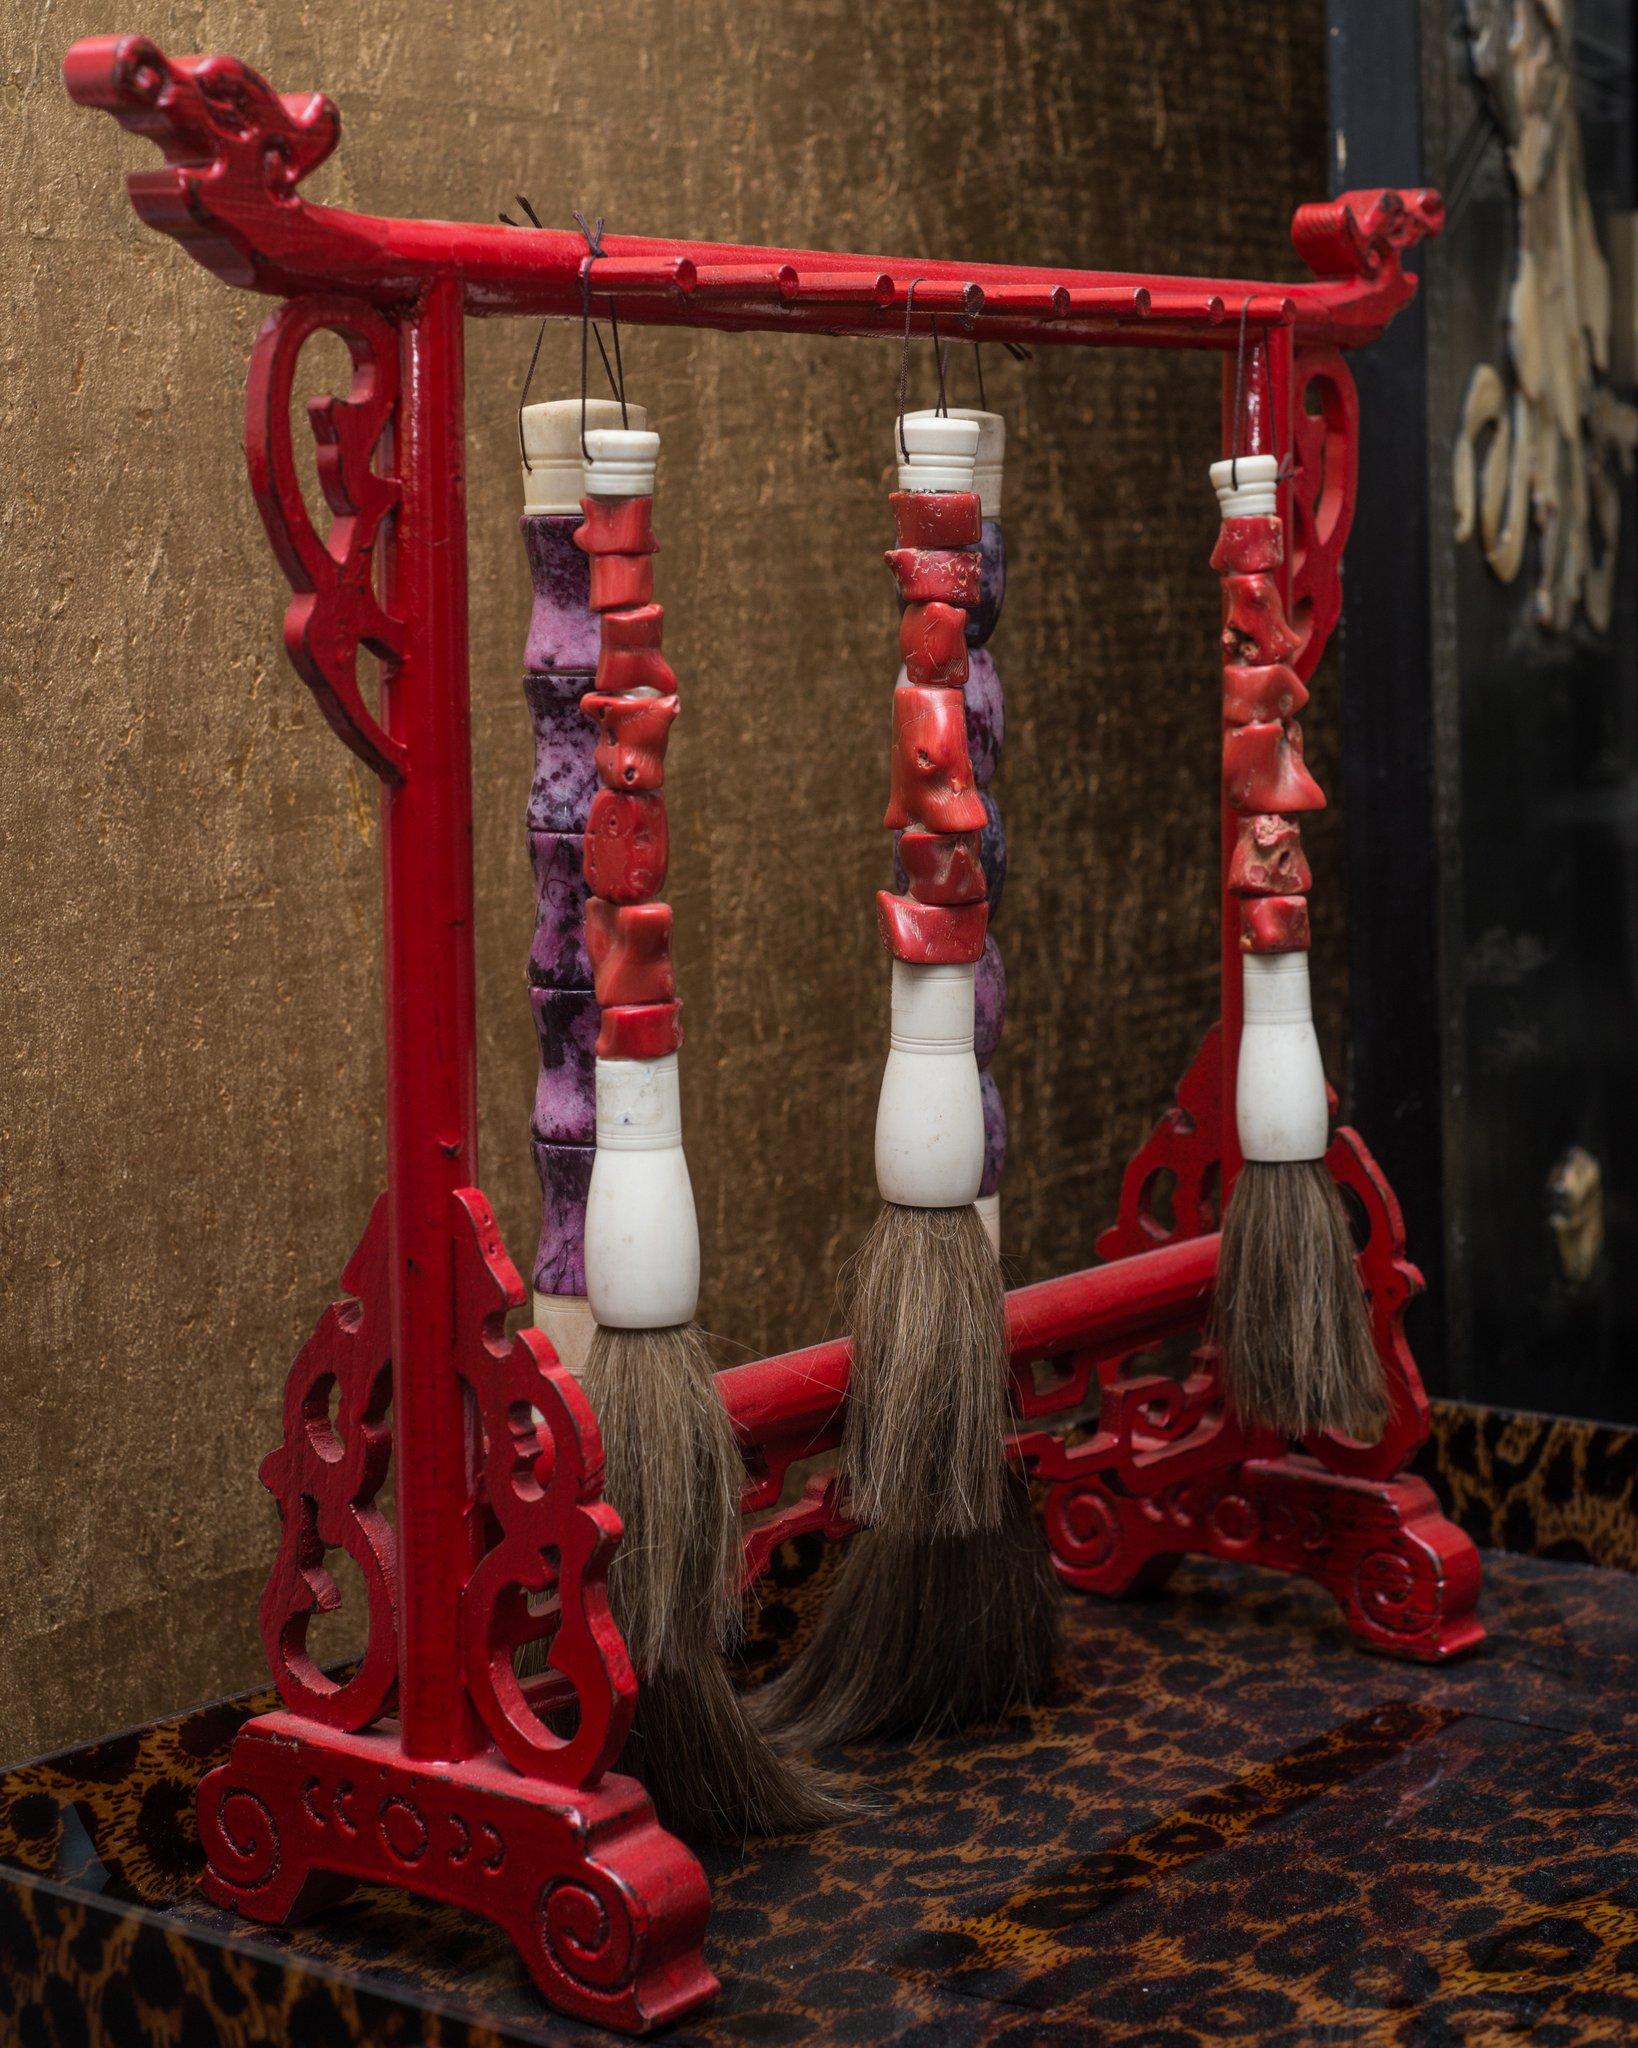 This beautiful unique red lacquered stand is used to present calligraphy horsehair brushes that are made of antique pieces of bone, coral and purple semi-precious stone. Typically used with an open ink well to write characters, calligraphy is as